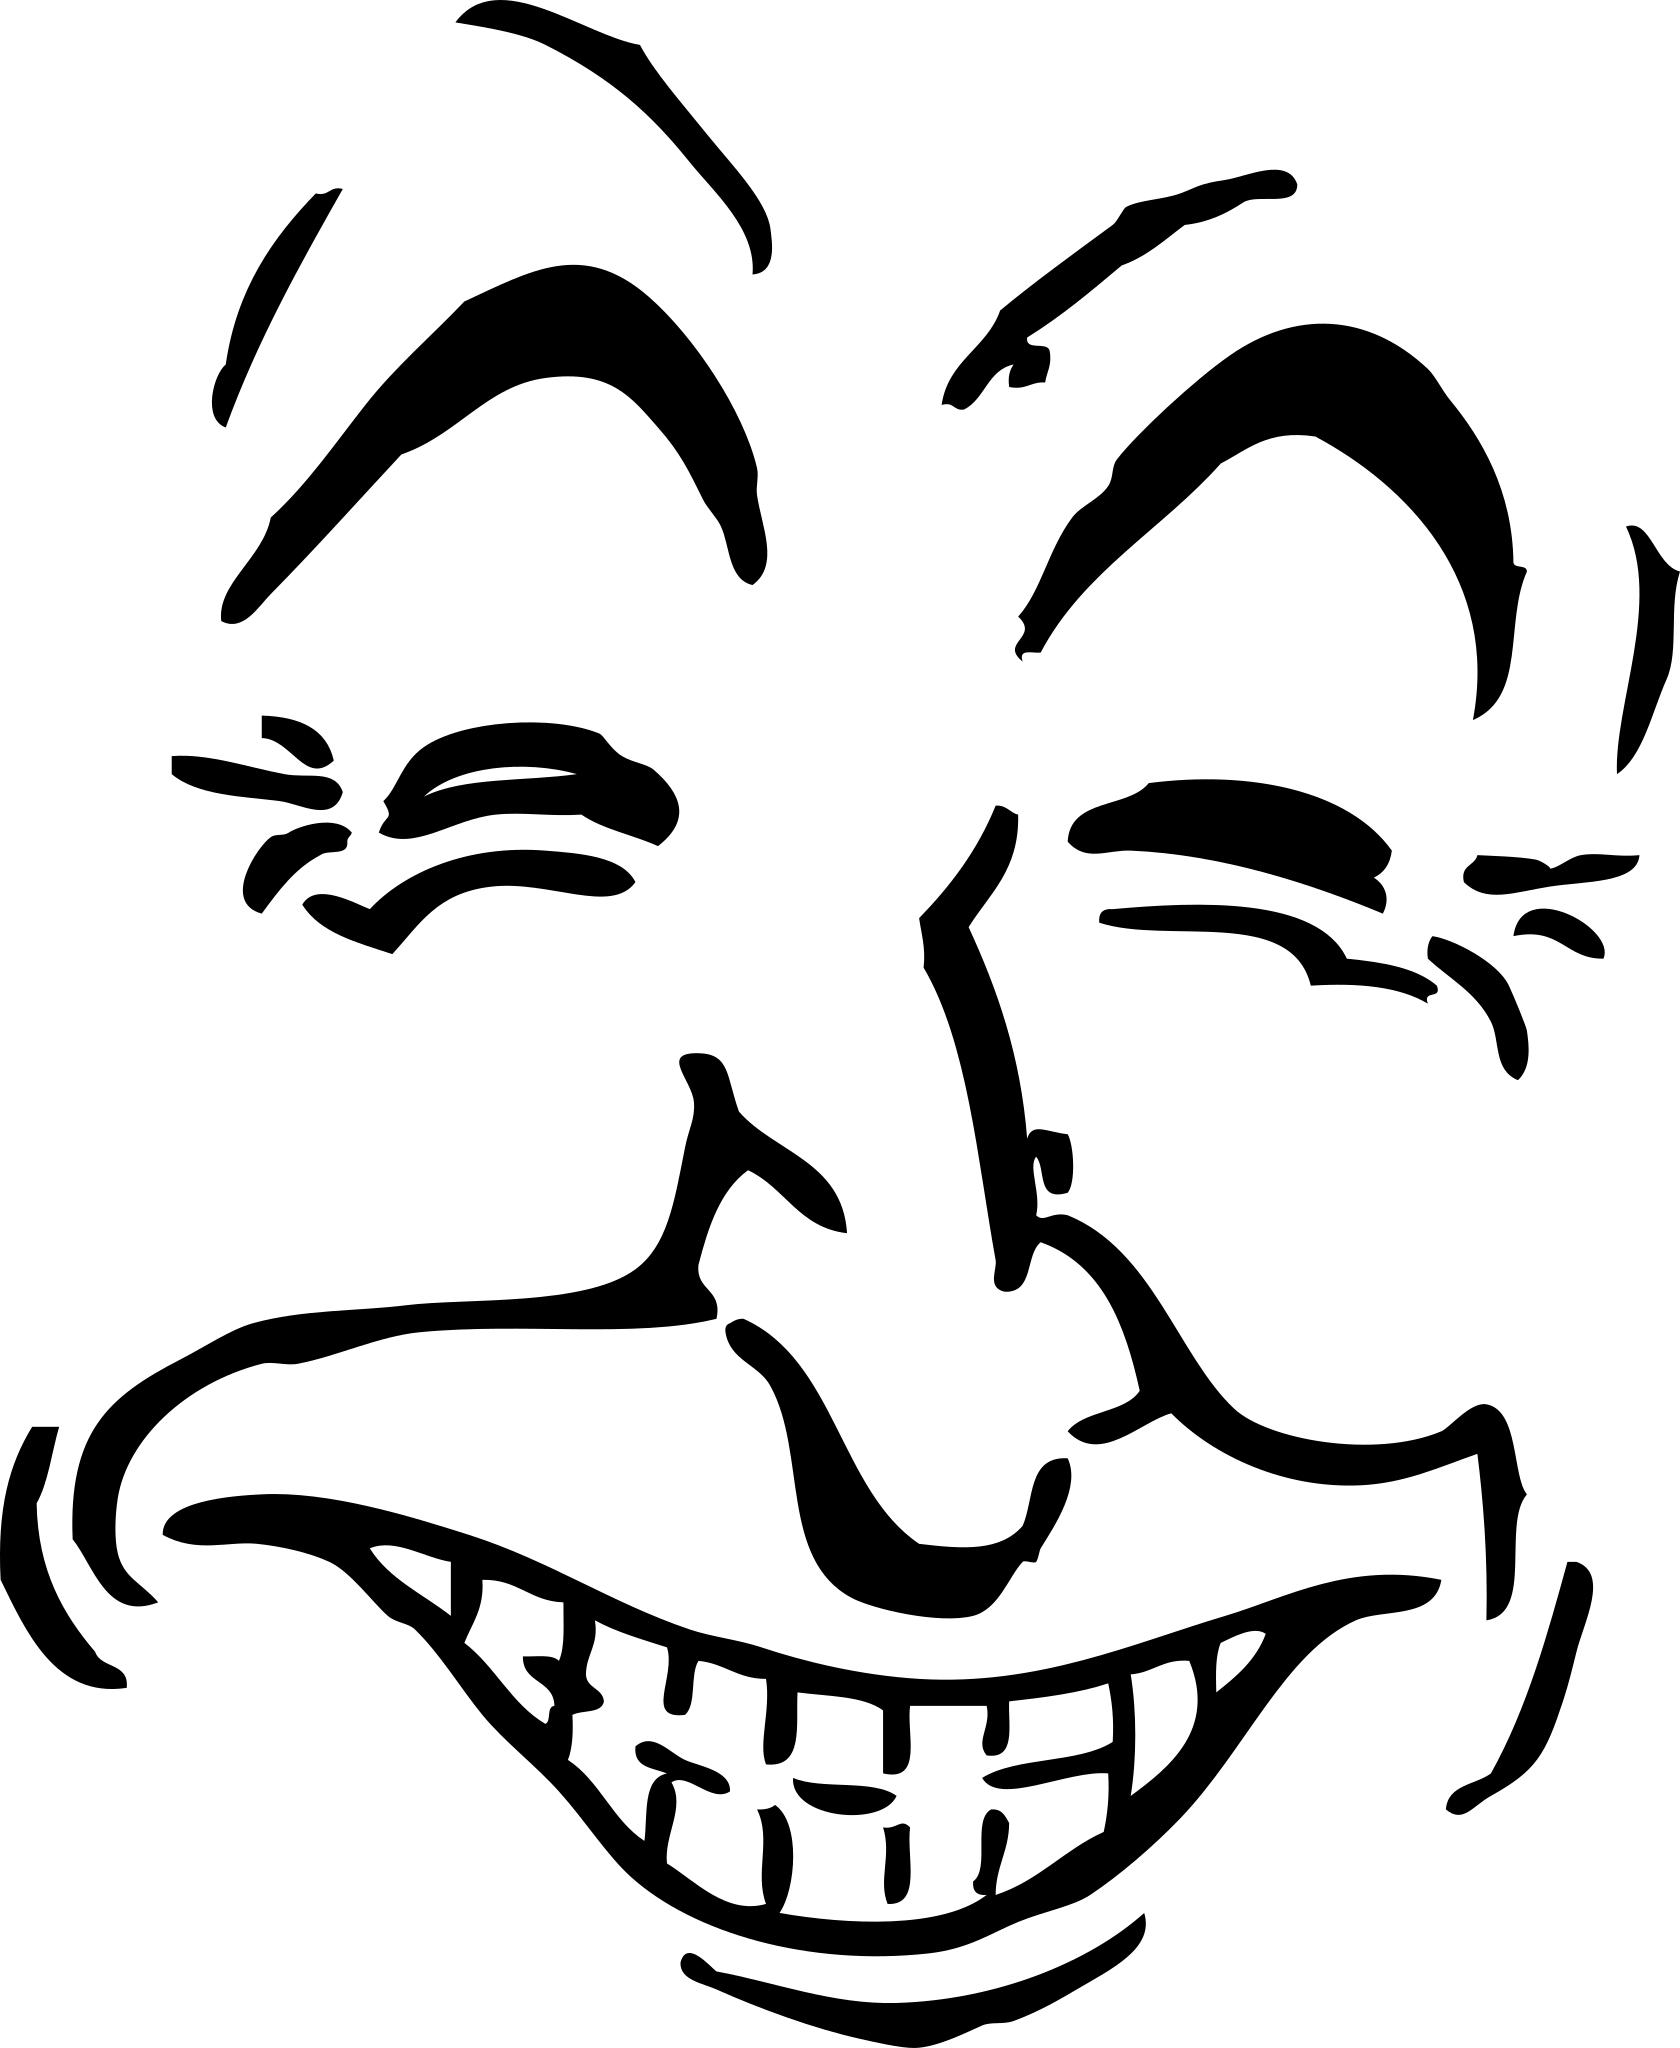 Free Images - man face smiley laughing